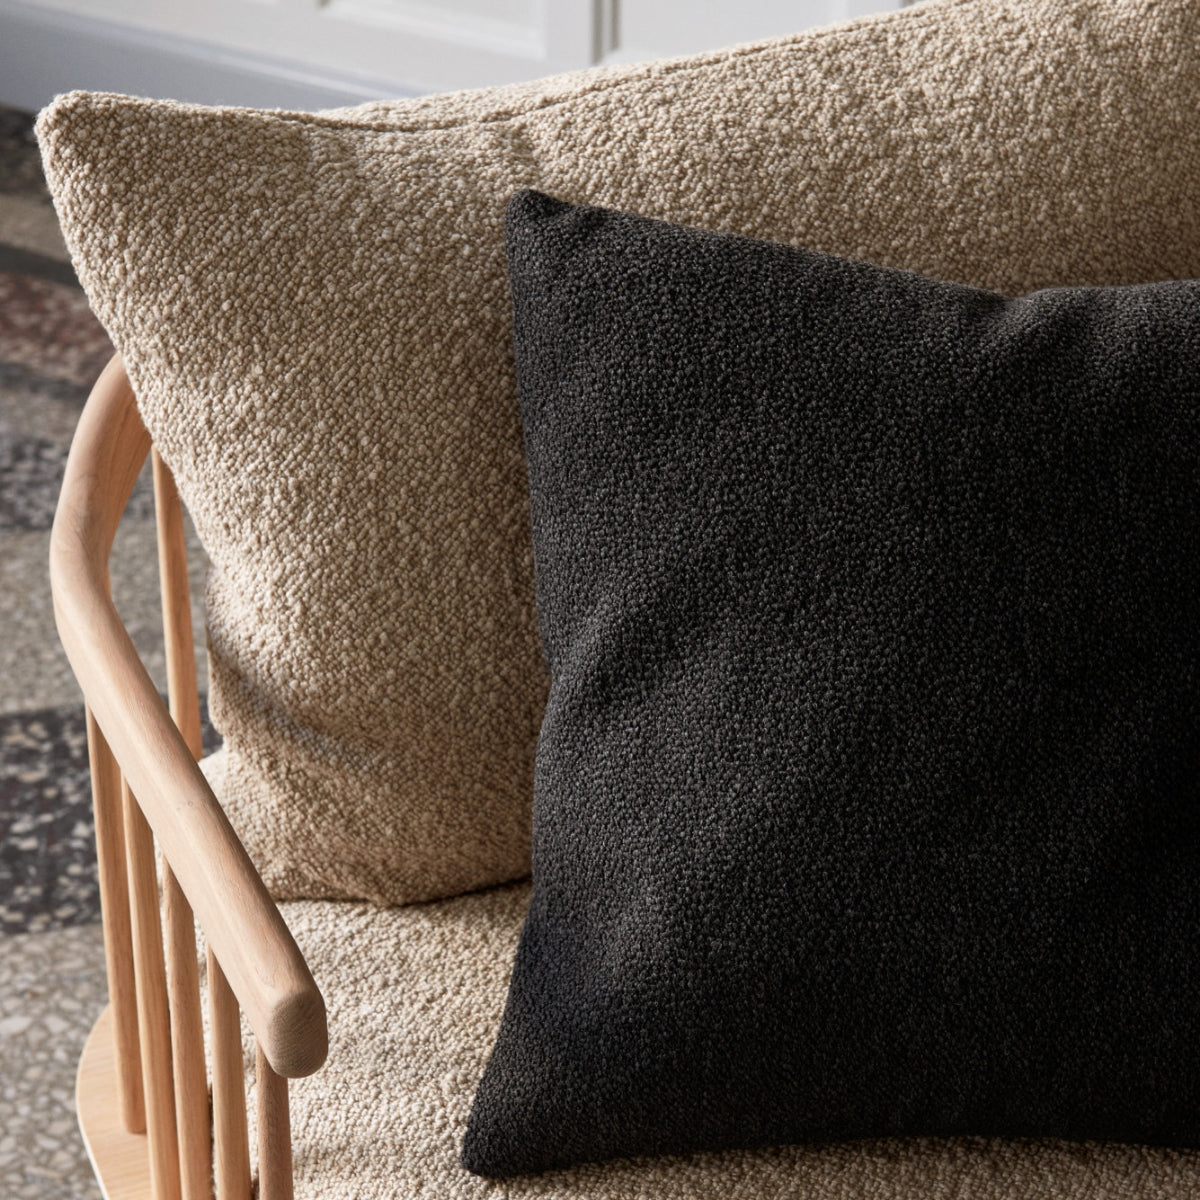 &Tradition | Collect Boucle Cushion - SC28 - Bolighuset Werenberg